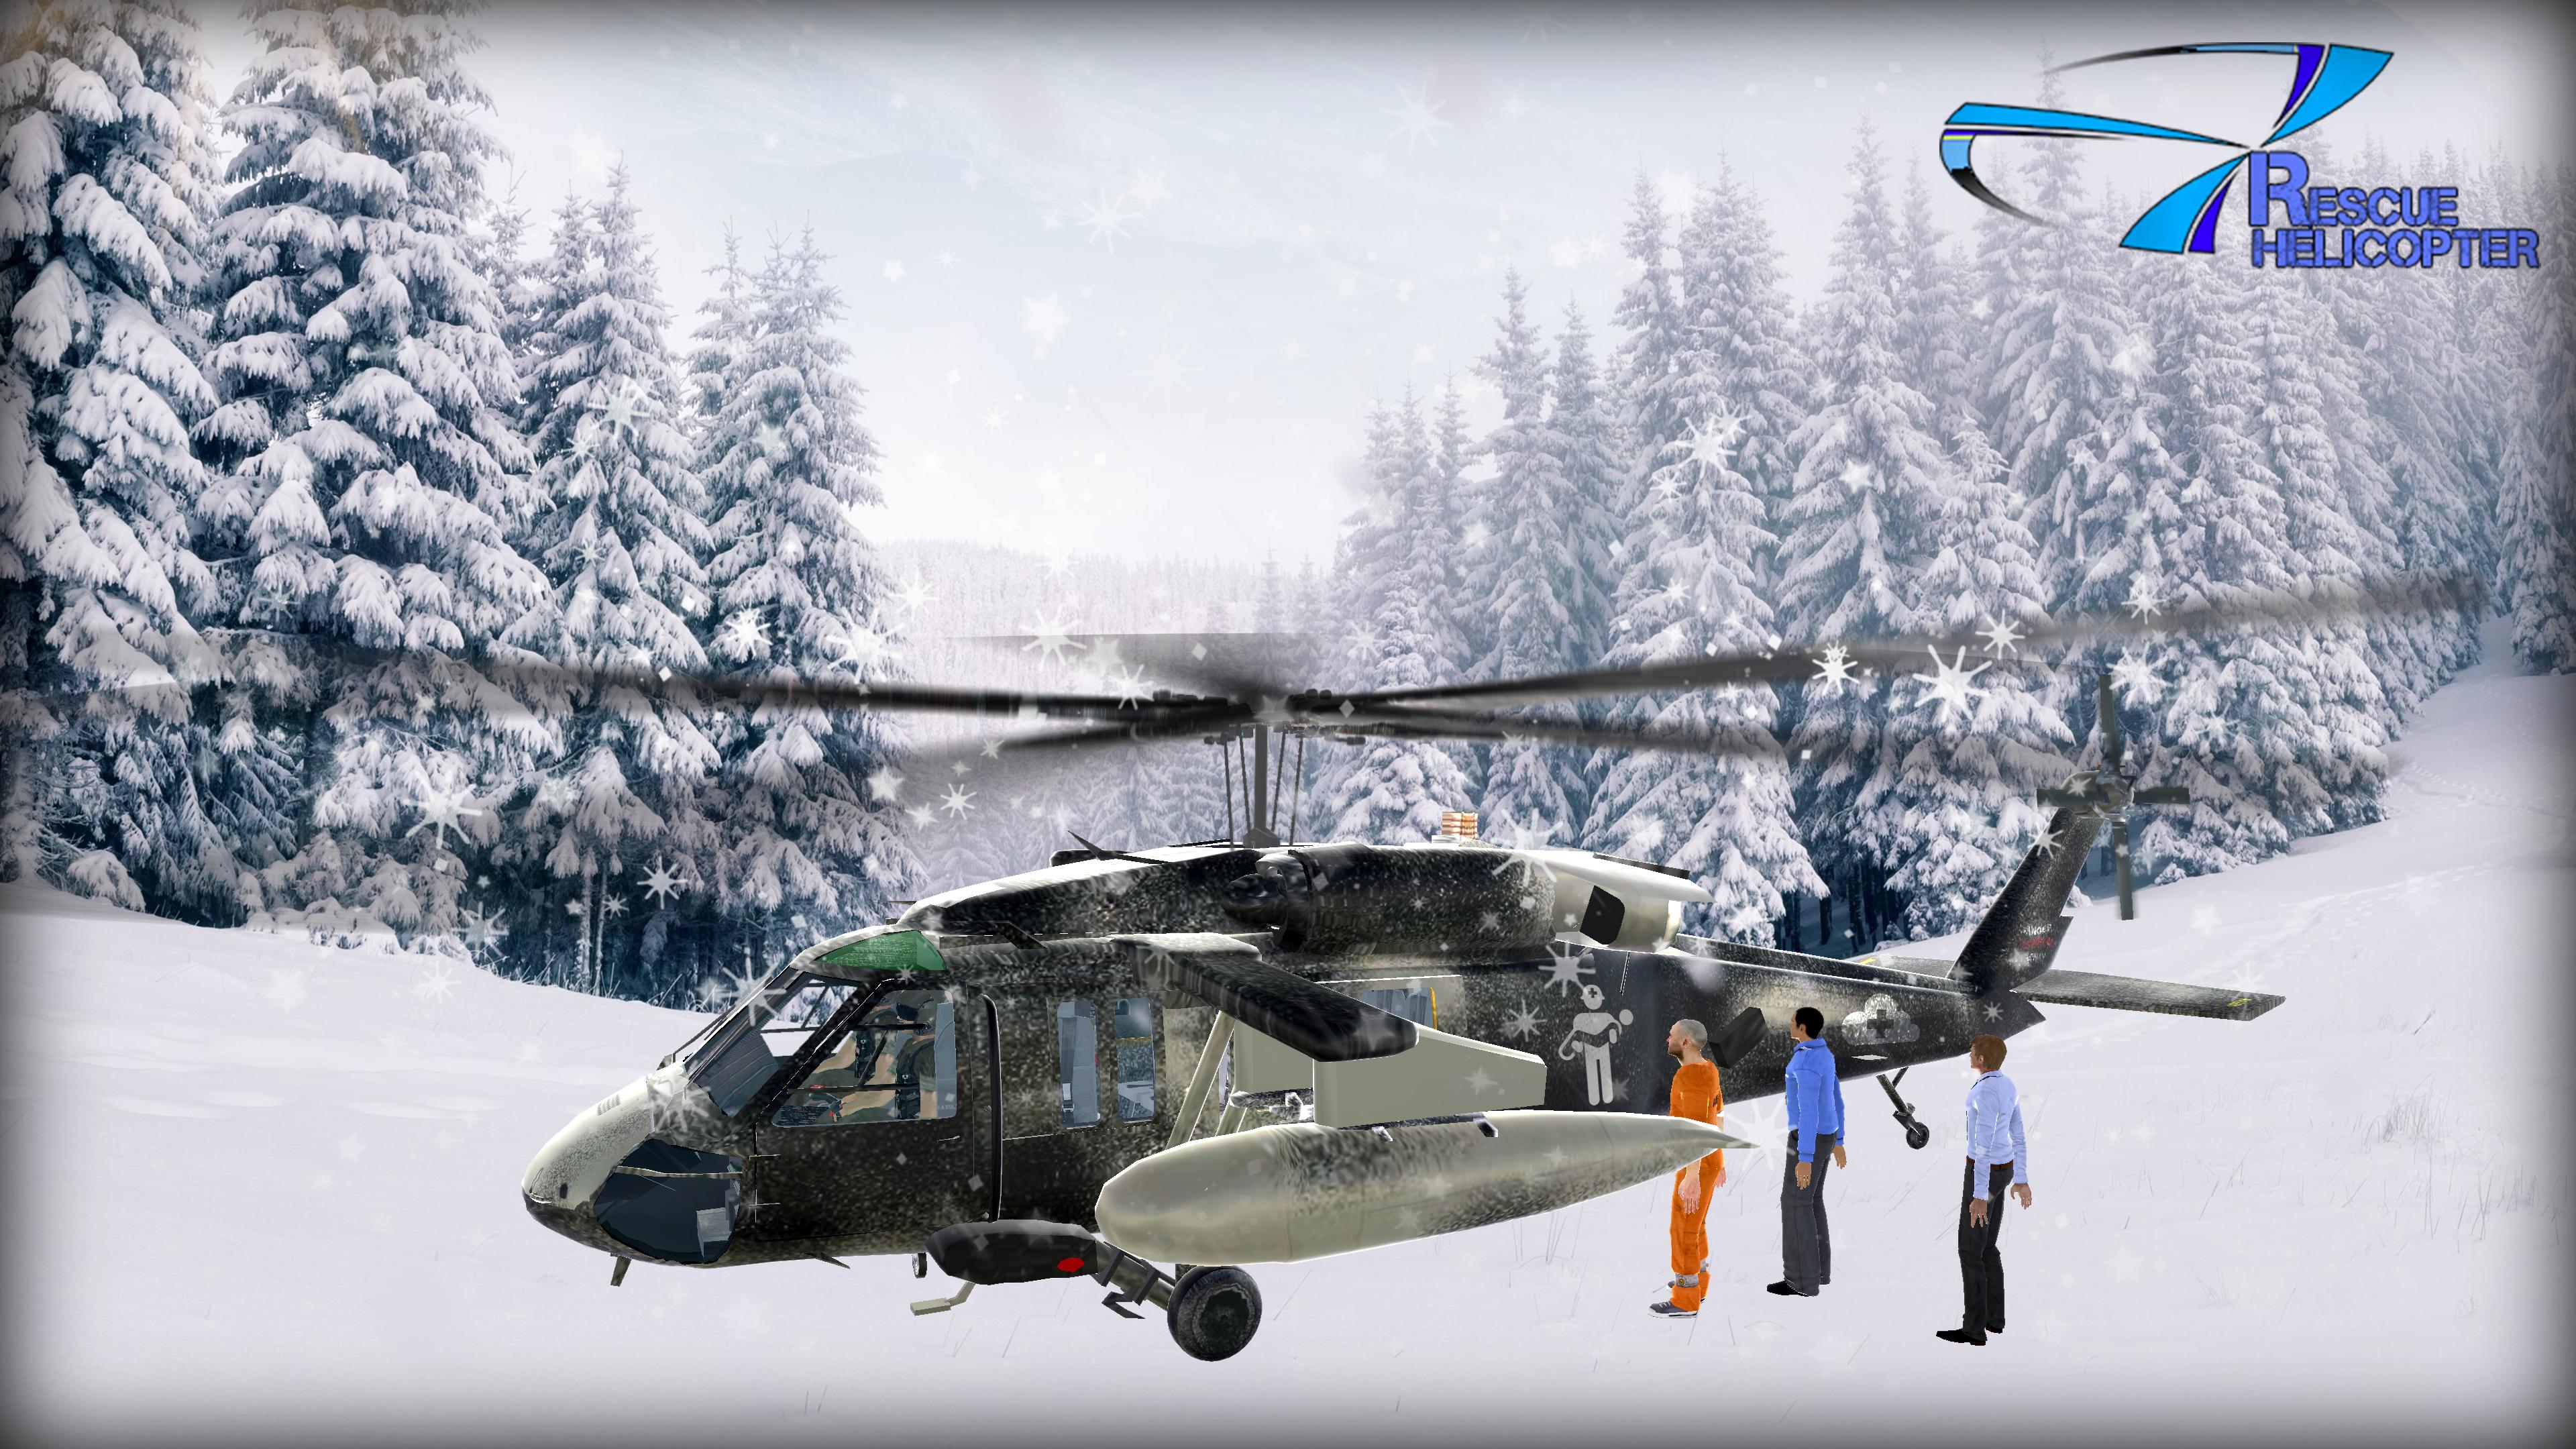 Helicopter Games Rescue Helicopter Simulator Game for Android  APK